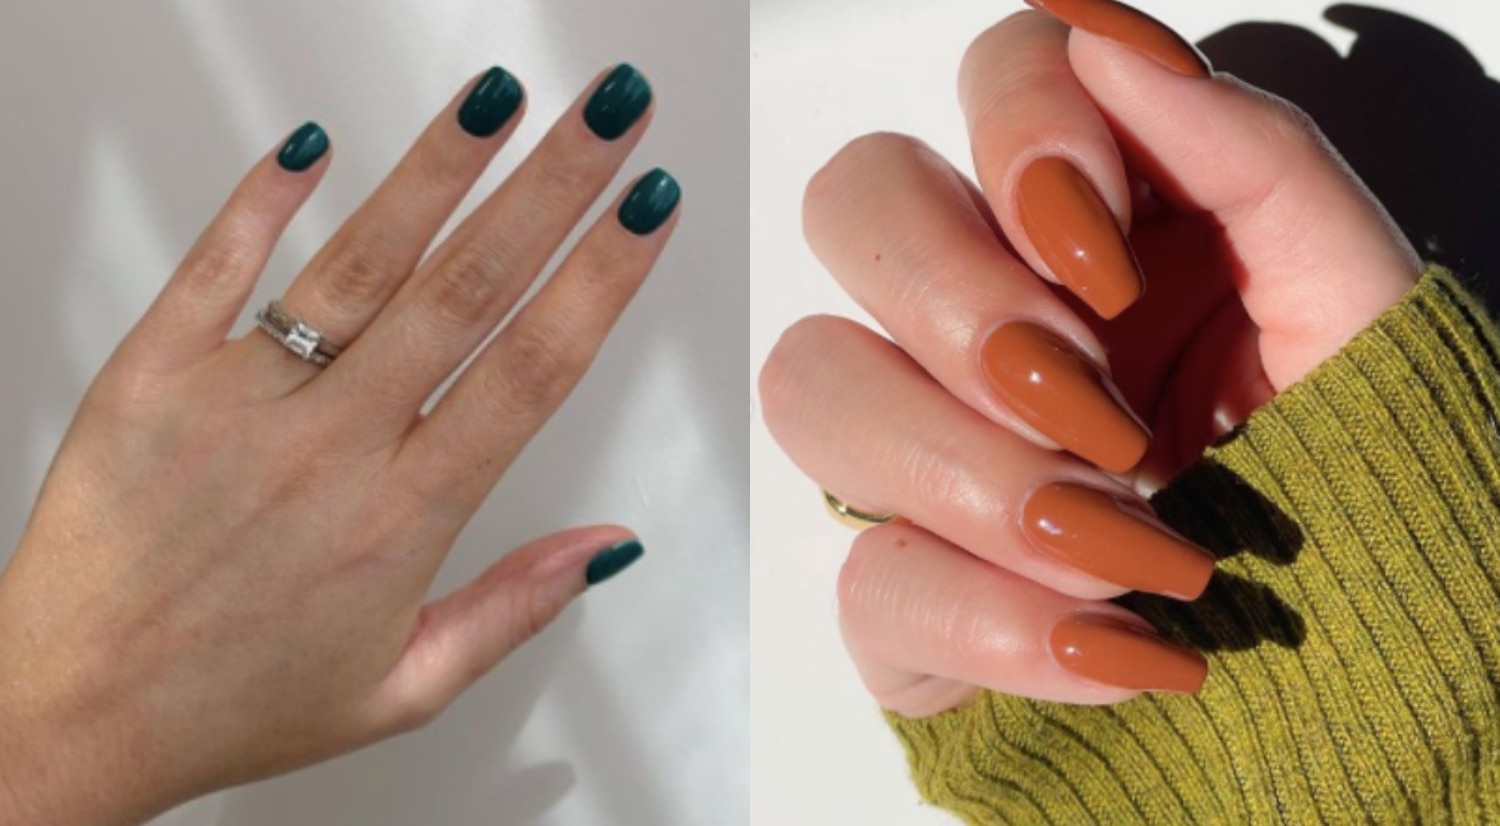 1. "Best Winter Nail Colors for 2021" - wide 6